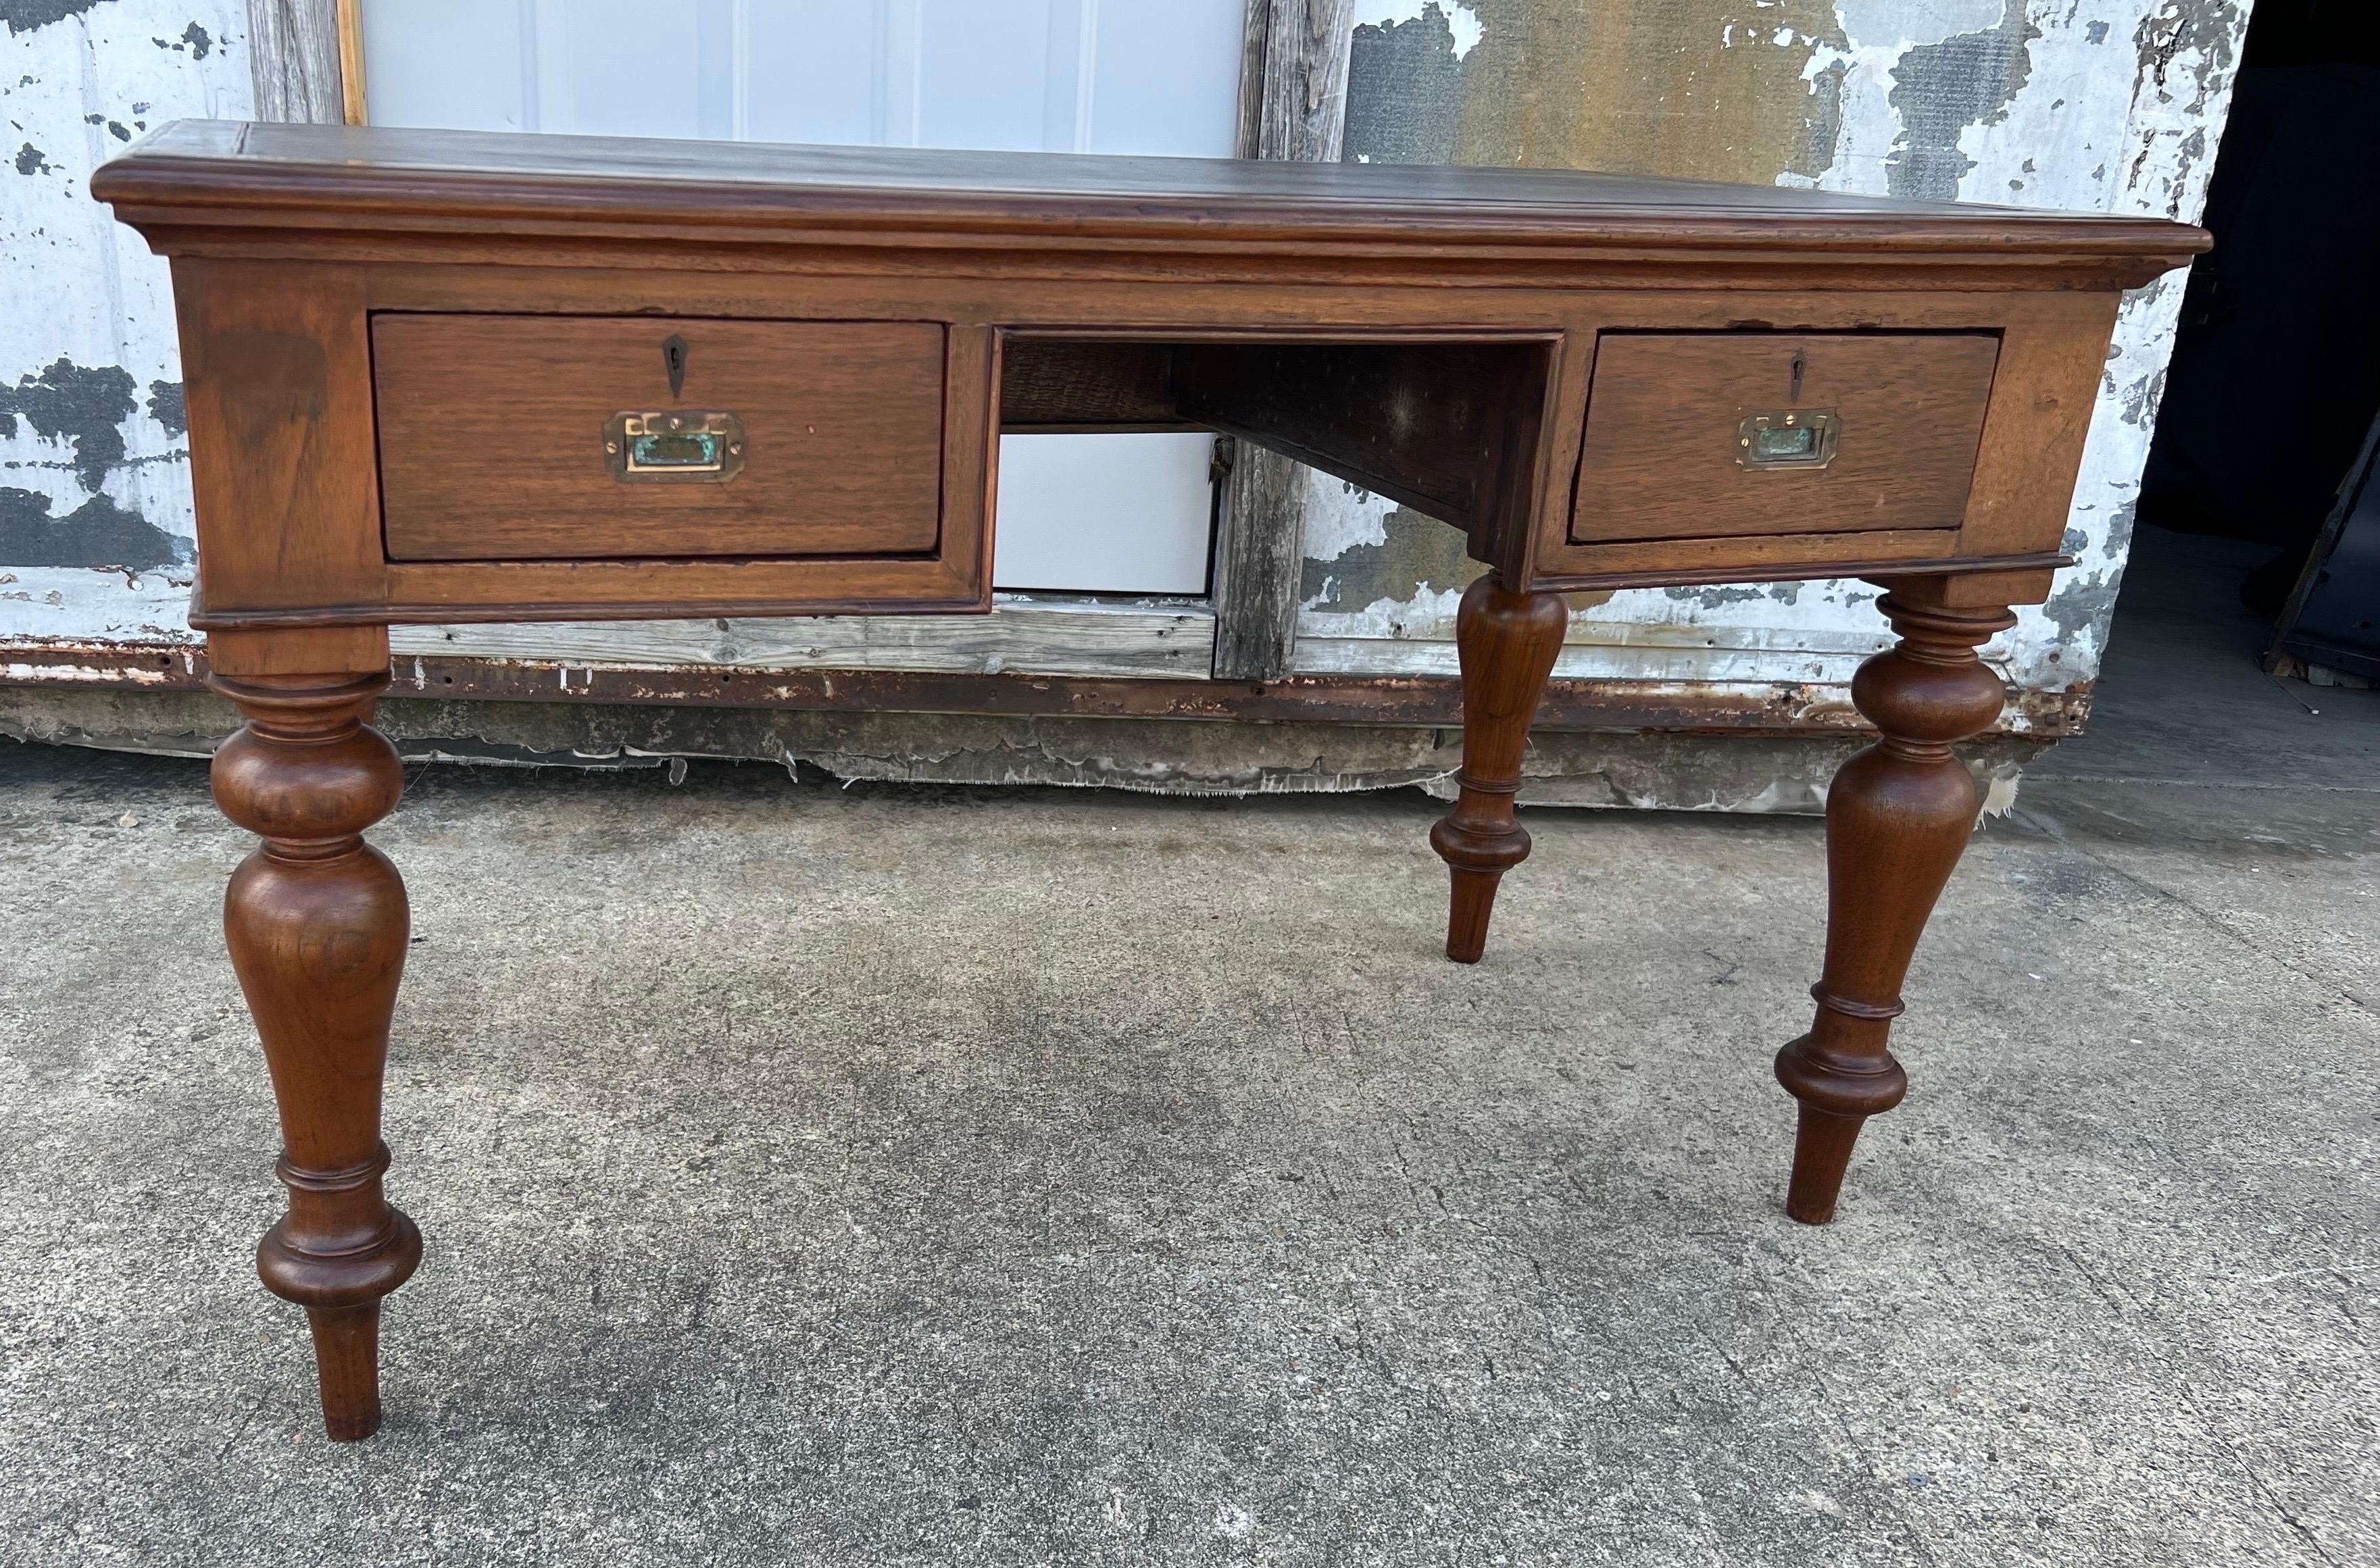 19th century British colonial campaign style leather top desk with turned legs, campaign pulls and leather top over three drawers. Finished on all sides with a 26” knee clearance.